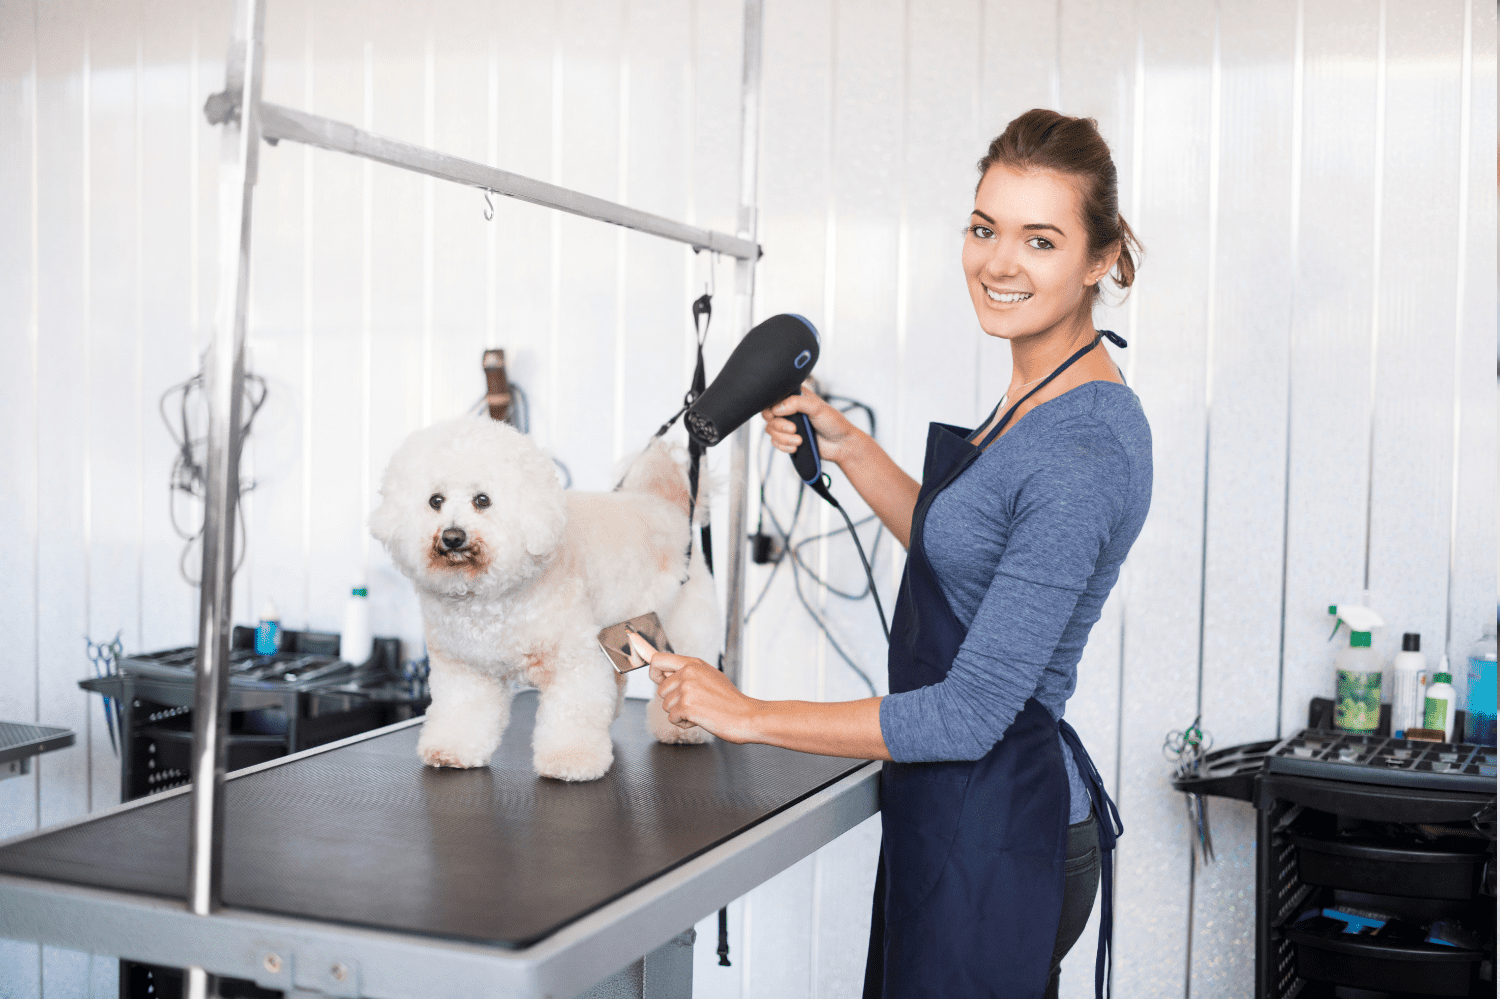 How Long Does It Take To Become A Dog Groomer?